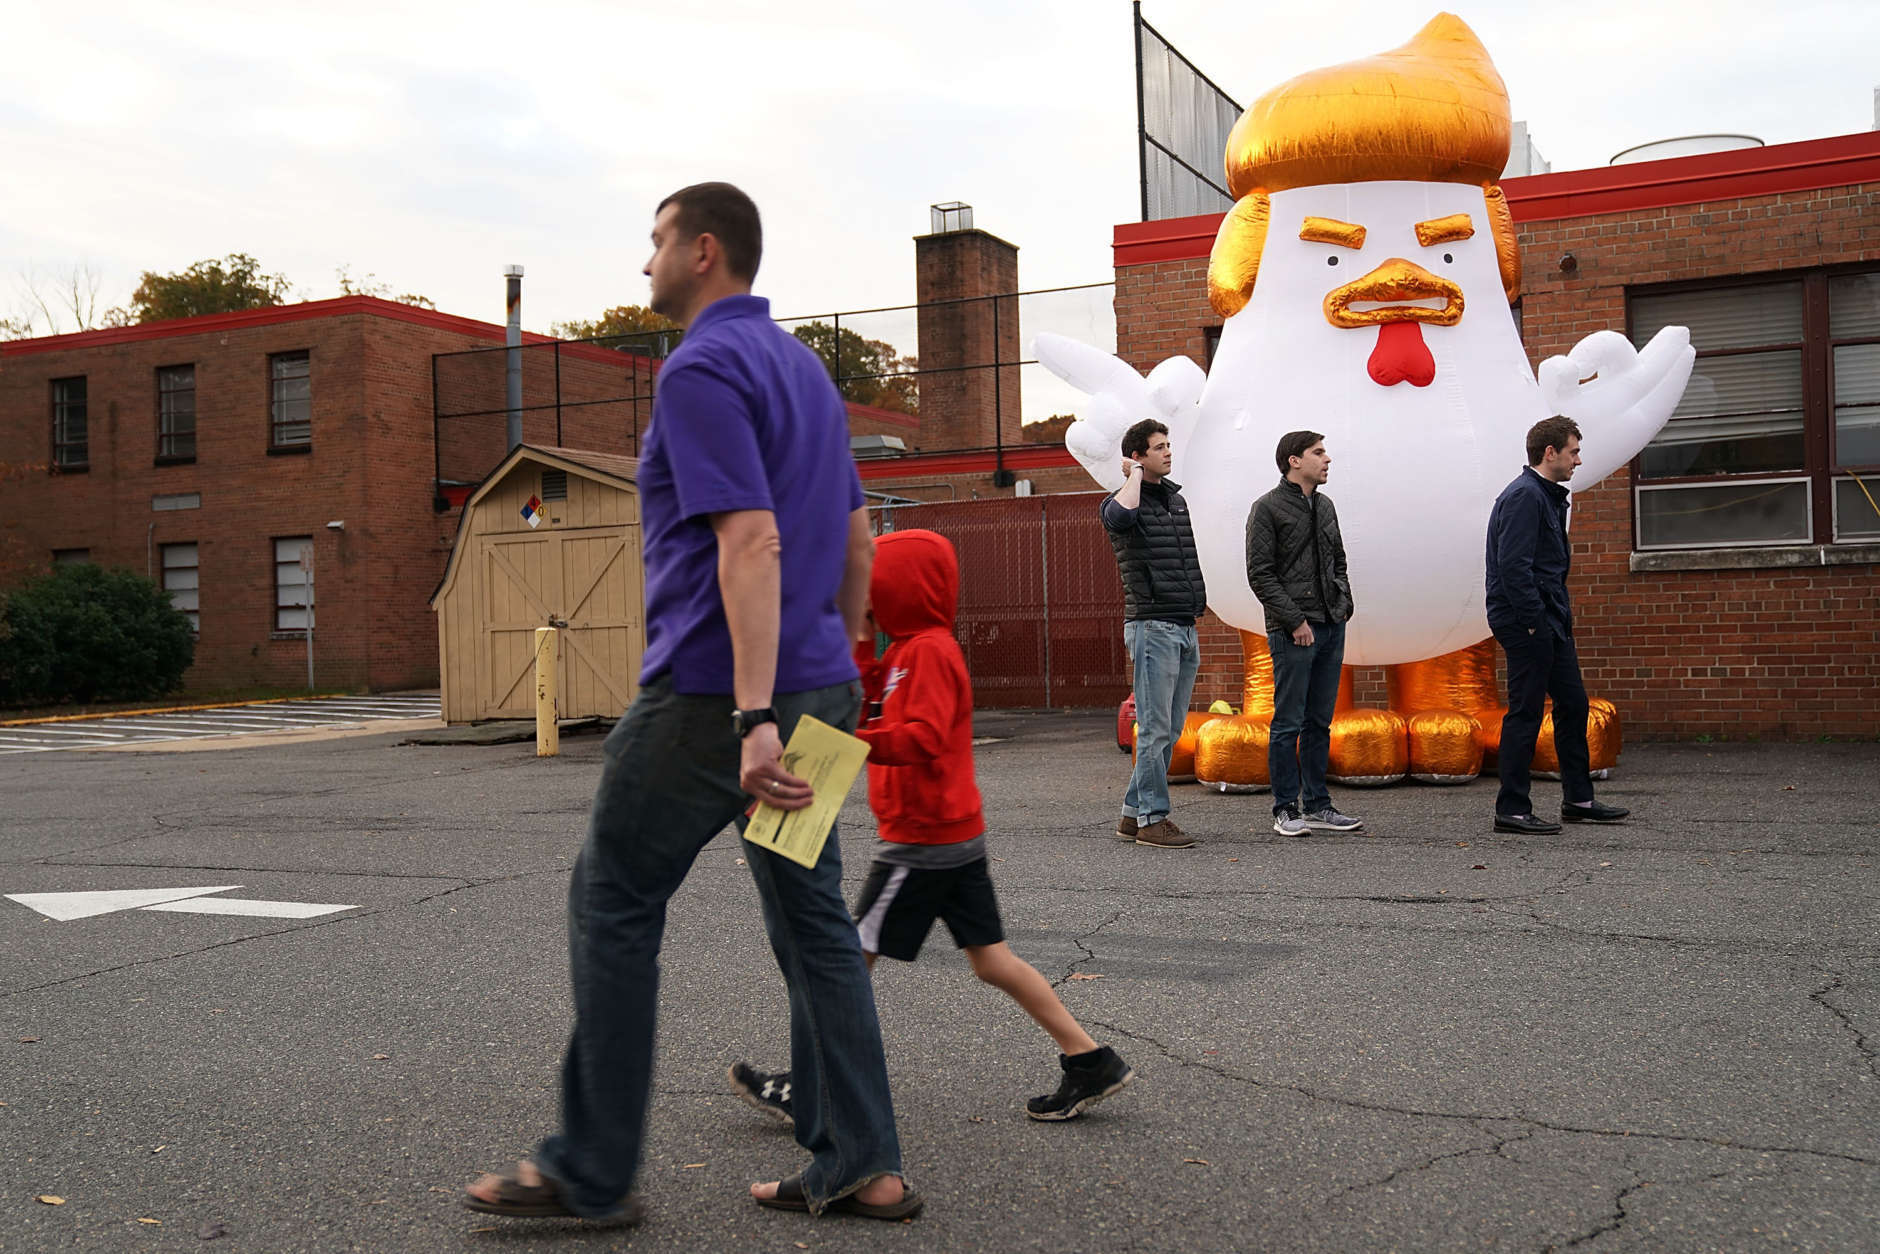 ALEXANDRIA, VA - NOVEMBER 07:  Supporters of Democrat Ralph Northam inflate a cartoon chicken made to resemble President Donald Trump outside the polling place at Washington Mill Elementary School November 7, 2017 in Alexandria, Virginia. (Photo by Chip Somodevilla/Getty Images)